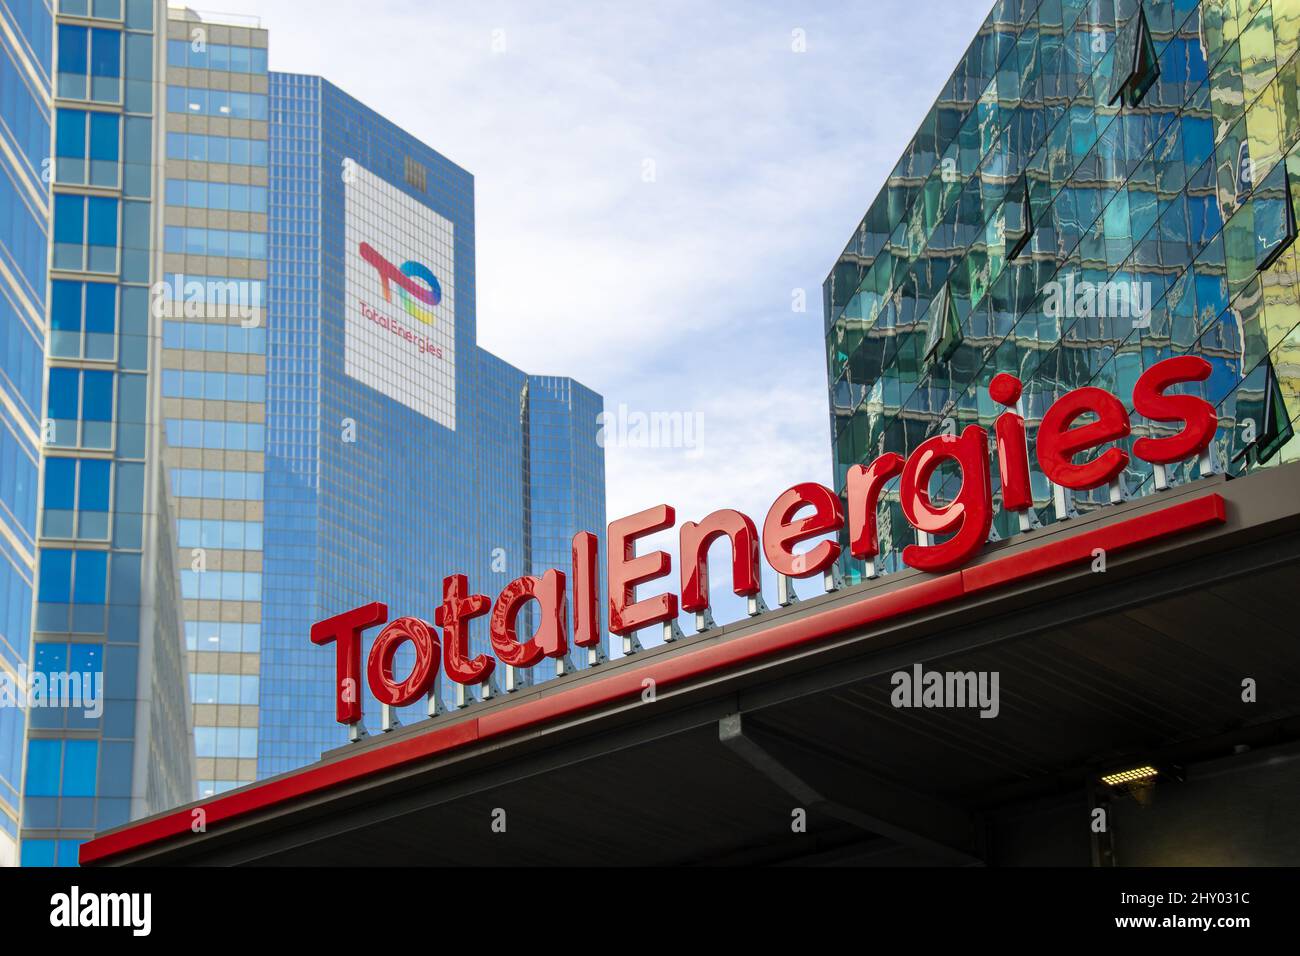 Exterior view of the tower of the headquarters of the oil company TotalEnergies, formerly known as Total, in the business district of Paris La Defense Stock Photo